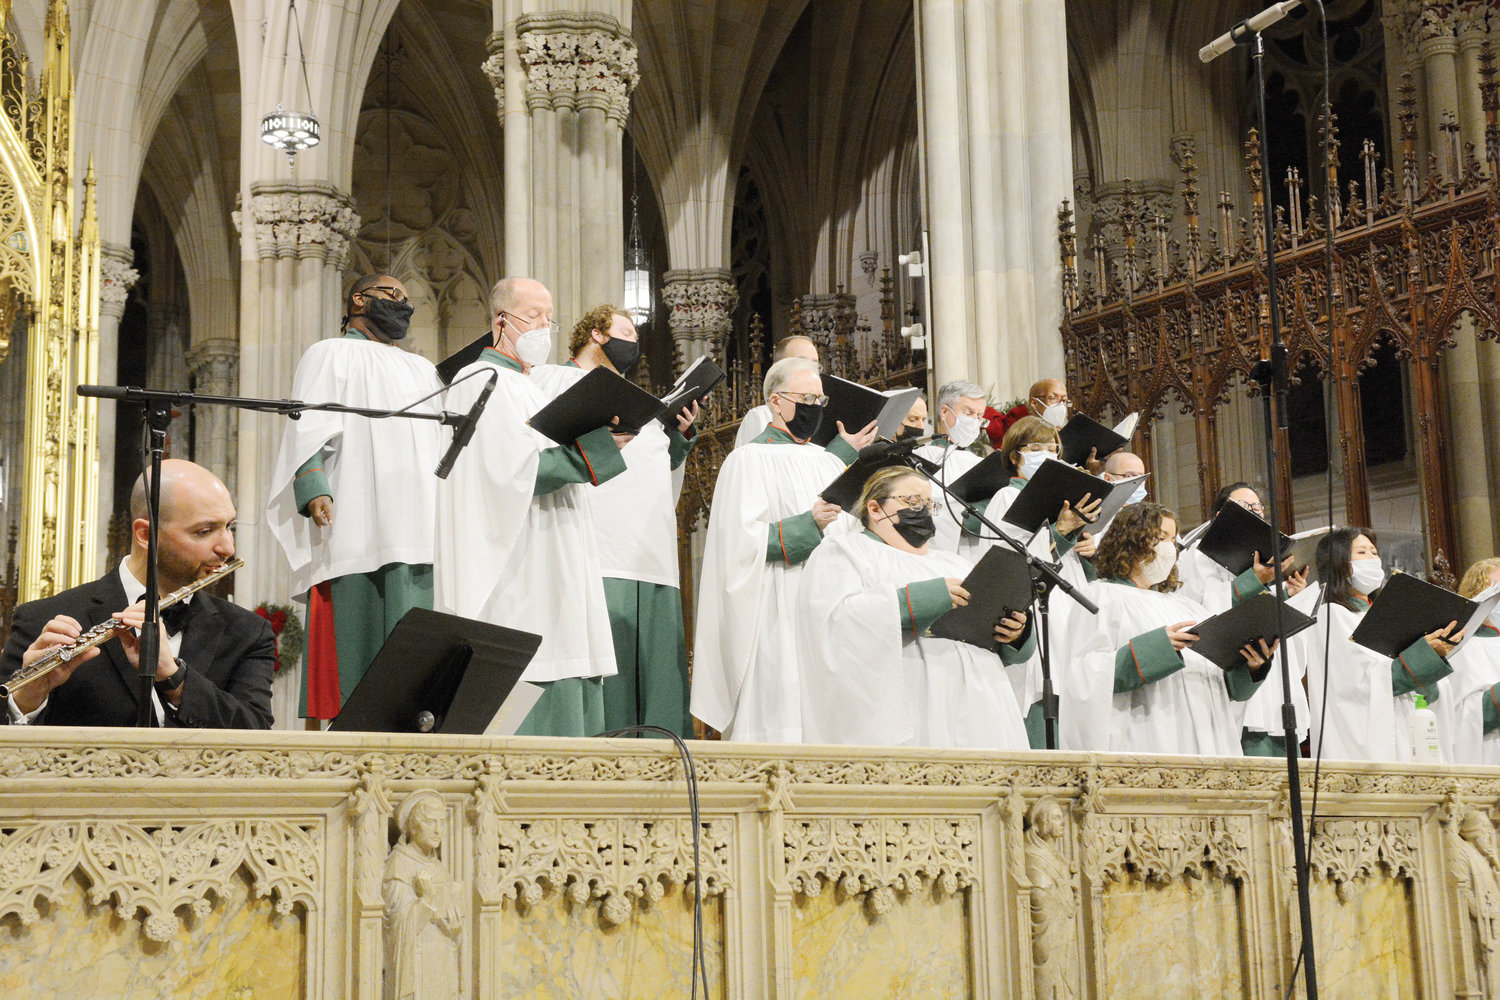 Music fills St. Patrick’s Cathedral during a prelude concert for Christmas Midnight Mass Dec. 25.